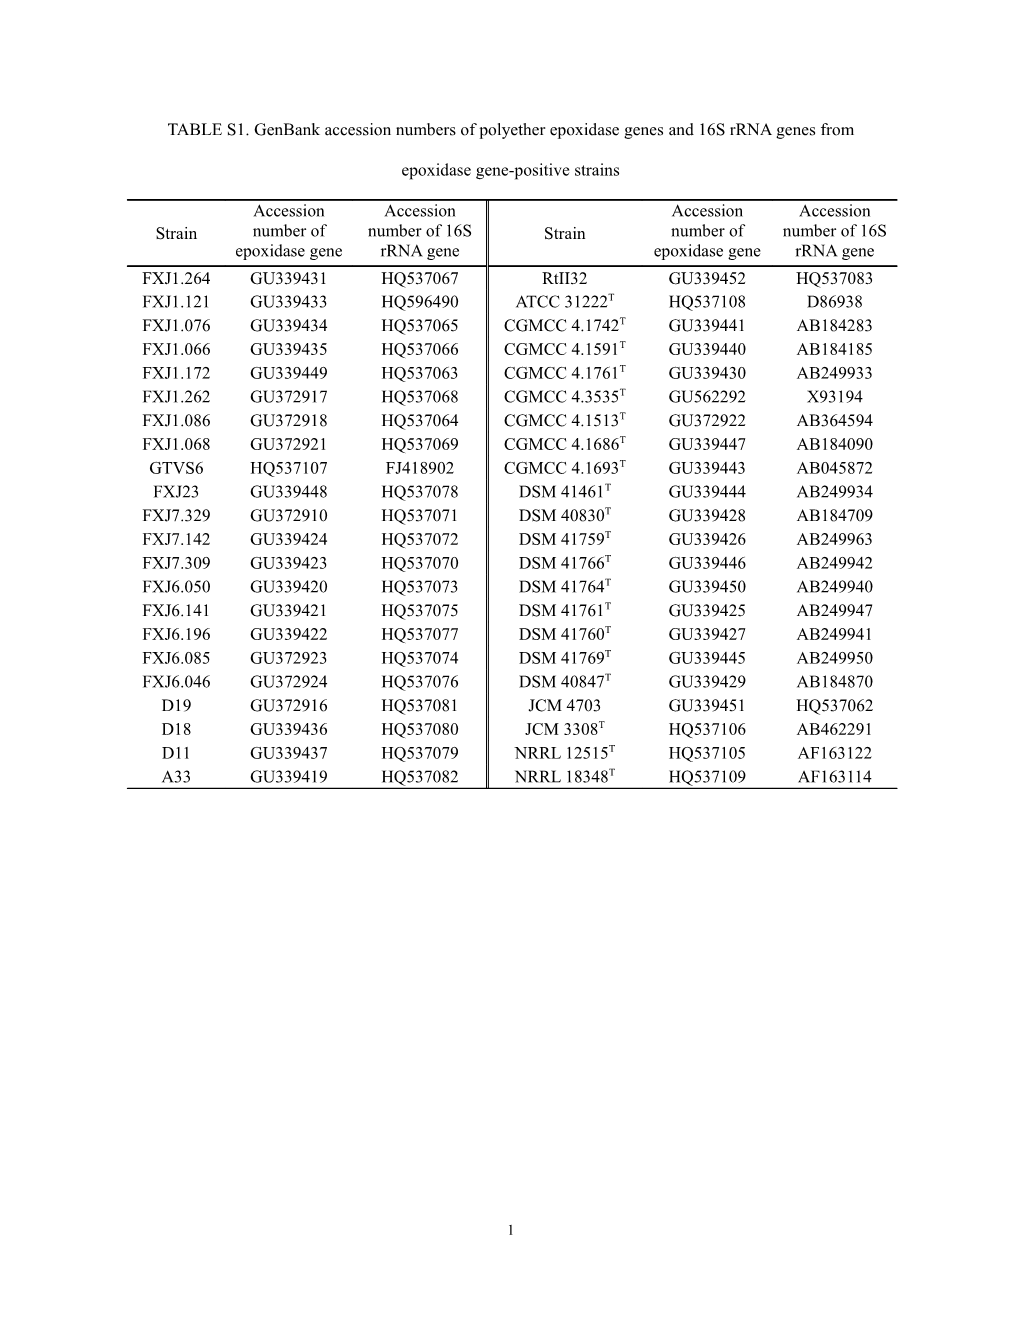 TABLE S1. Genbank Accession Numbers of Polyether Epoxidase Genes and 16S Rrna Genes From